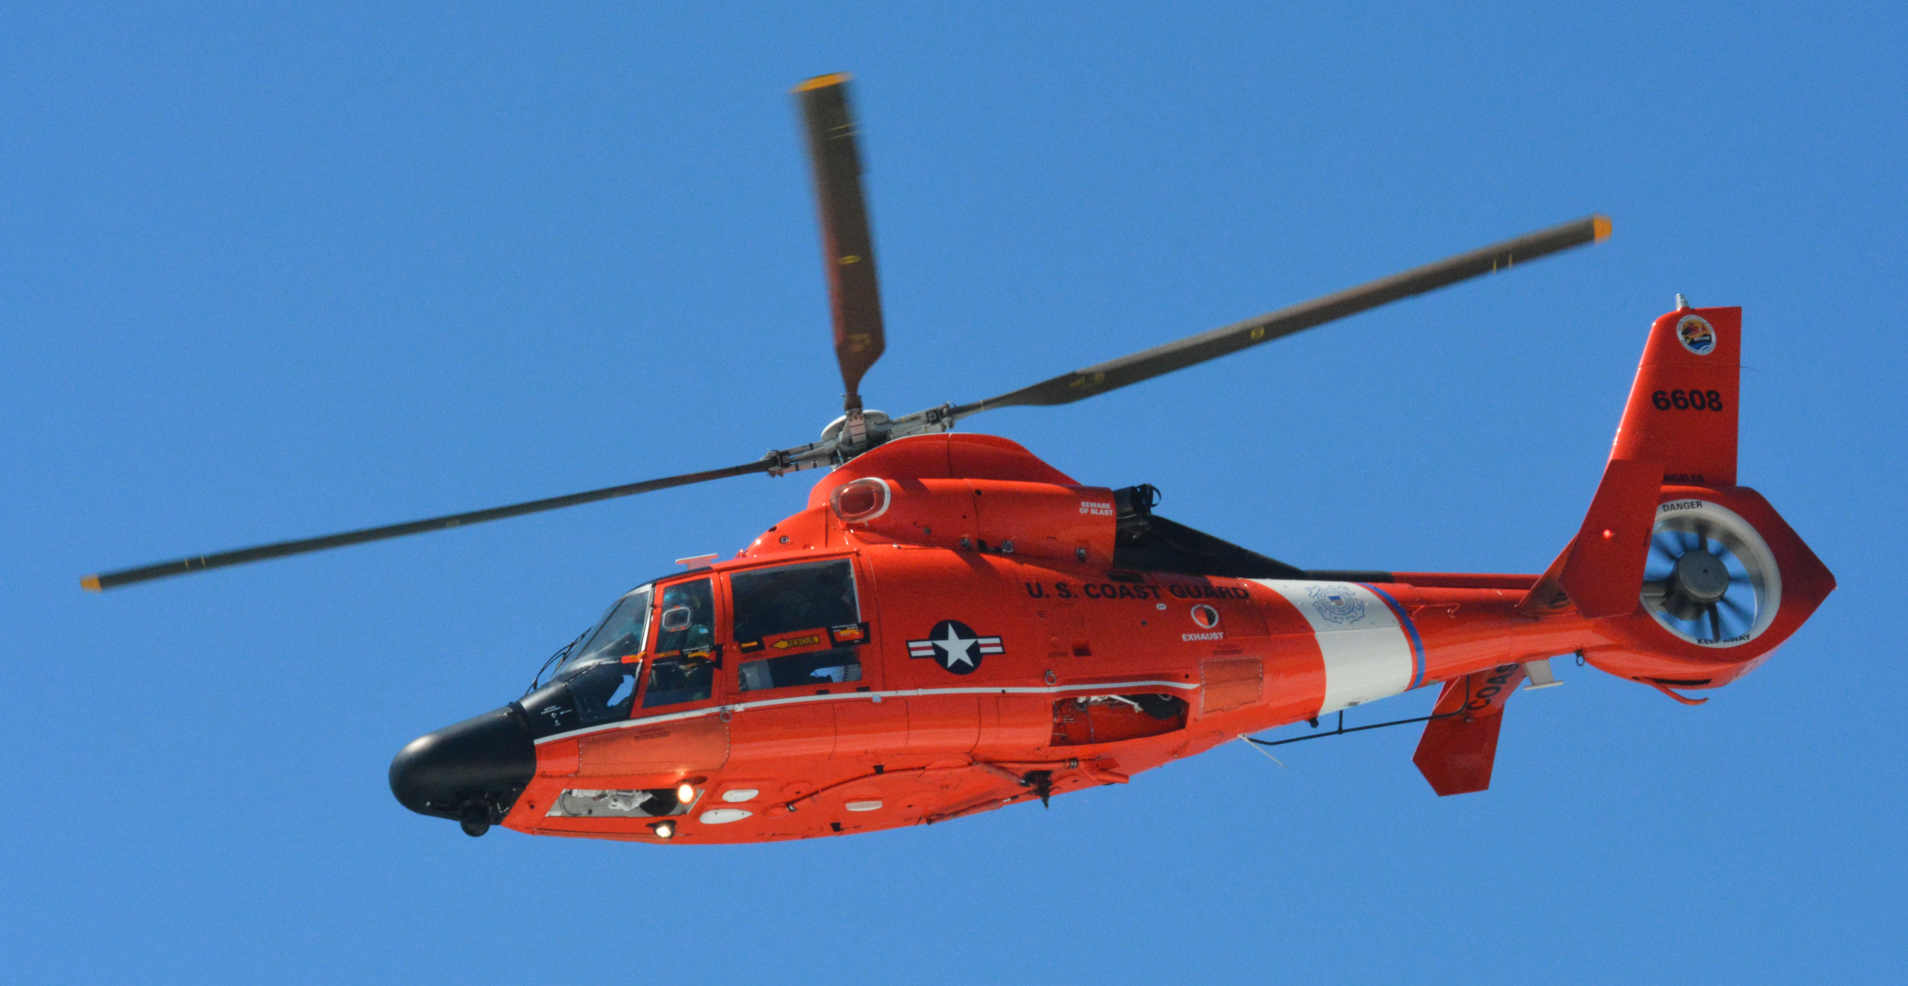  A U.S. Coast Guard MH-65 Dolphin helicopter. (Image: Wikipedia.org) 